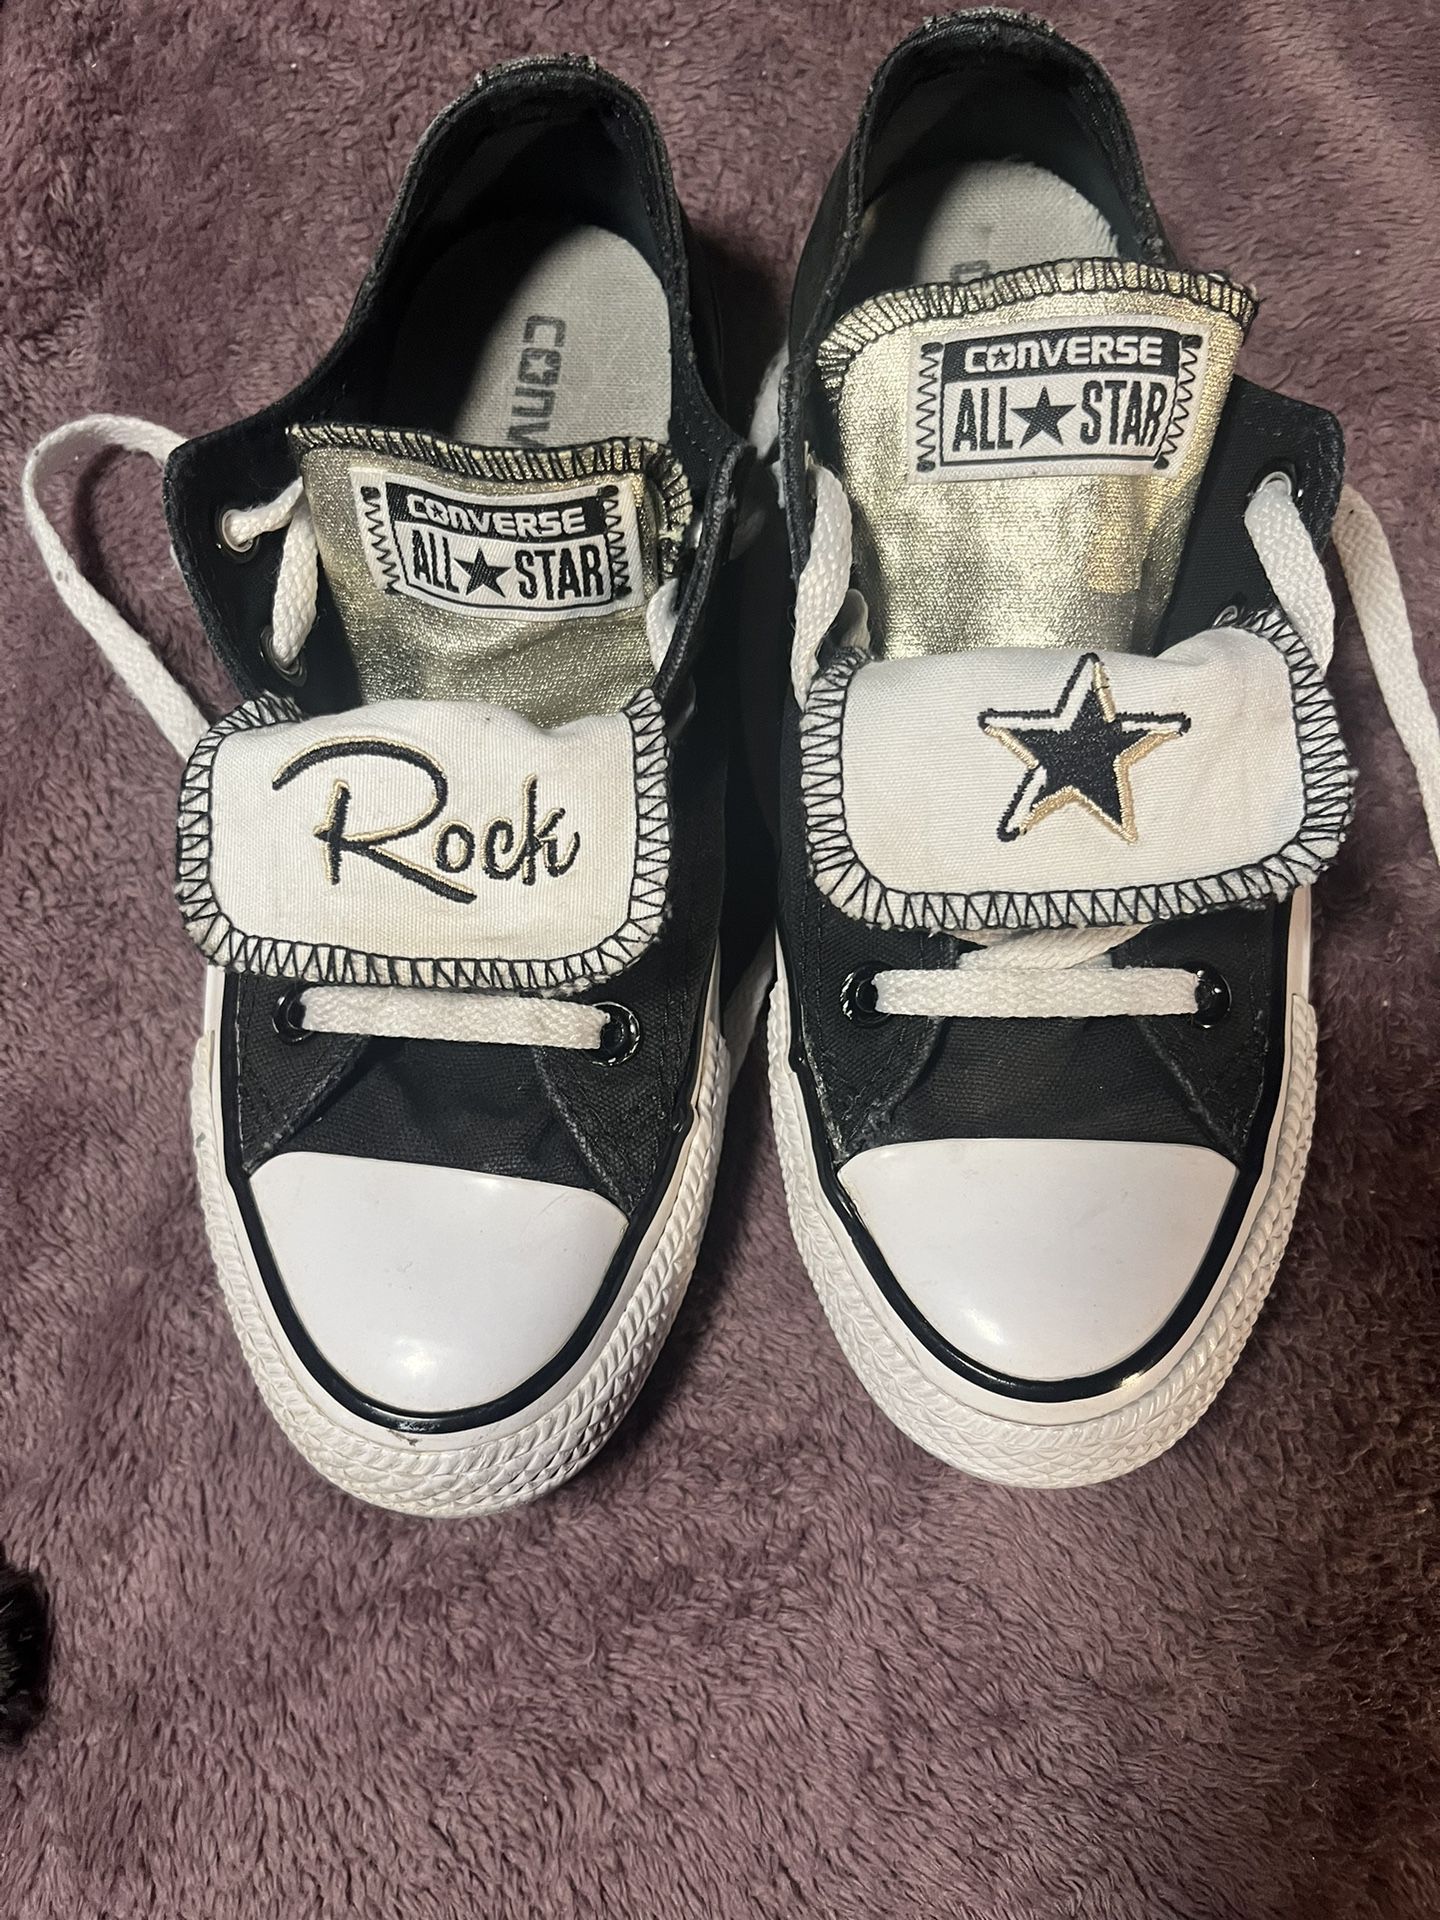 Converse Chuck Taylor All Star, Rock Star, Low Top Black Women's Size 6 Classic for Sale Thornton, CO - OfferUp